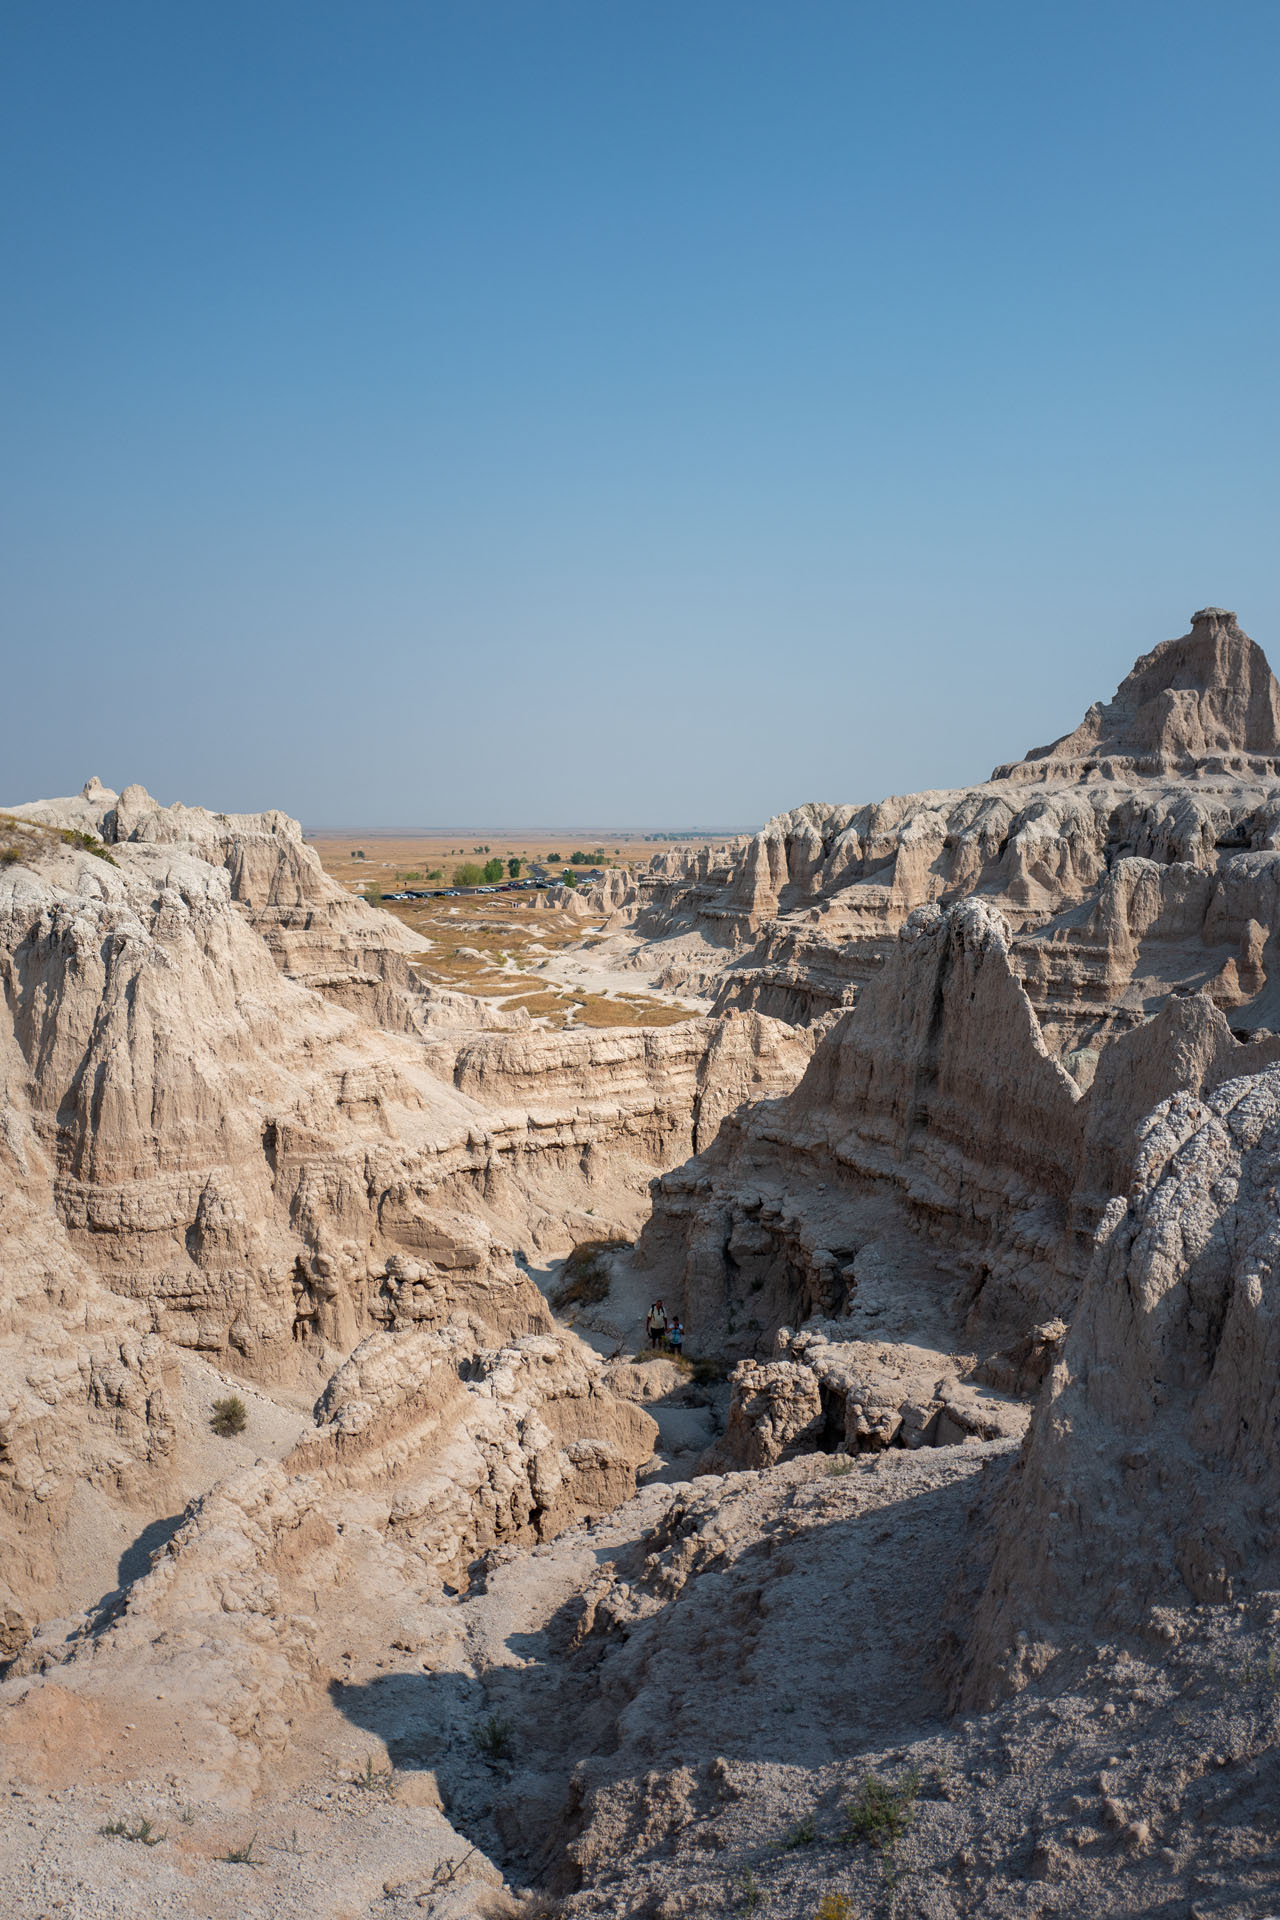 View over the Badlands National Park in South Dakota